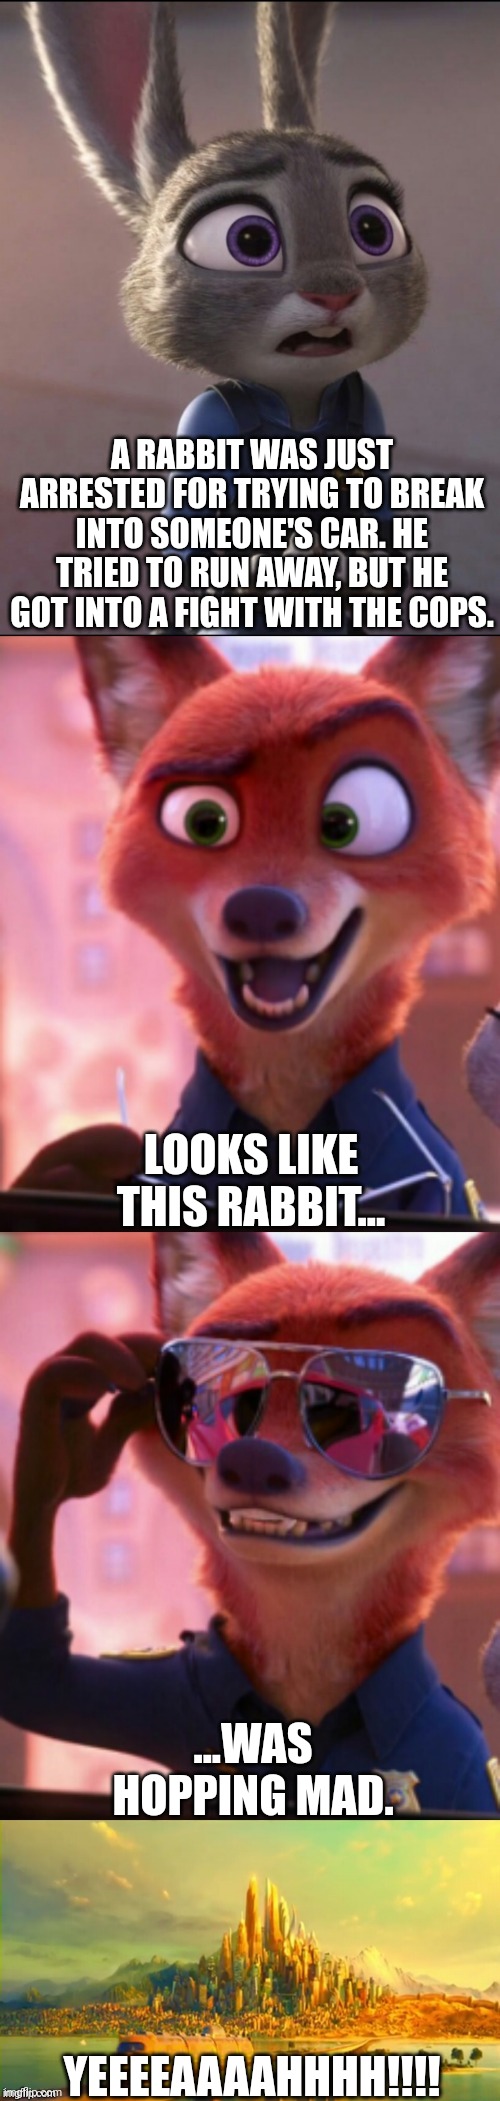 CSI: Zootopia 41 | A RABBIT WAS JUST ARRESTED FOR TRYING TO BREAK INTO SOMEONE'S CAR. HE TRIED TO RUN AWAY, BUT HE GOT INTO A FIGHT WITH THE COPS. LOOKS LIKE THIS RABBIT... ...WAS HOPPING MAD. YEEEEAAAAHHHH!!!! | image tagged in csi zootopia,zootopia,judy hopps,nick wilde,parody,funny | made w/ Imgflip meme maker